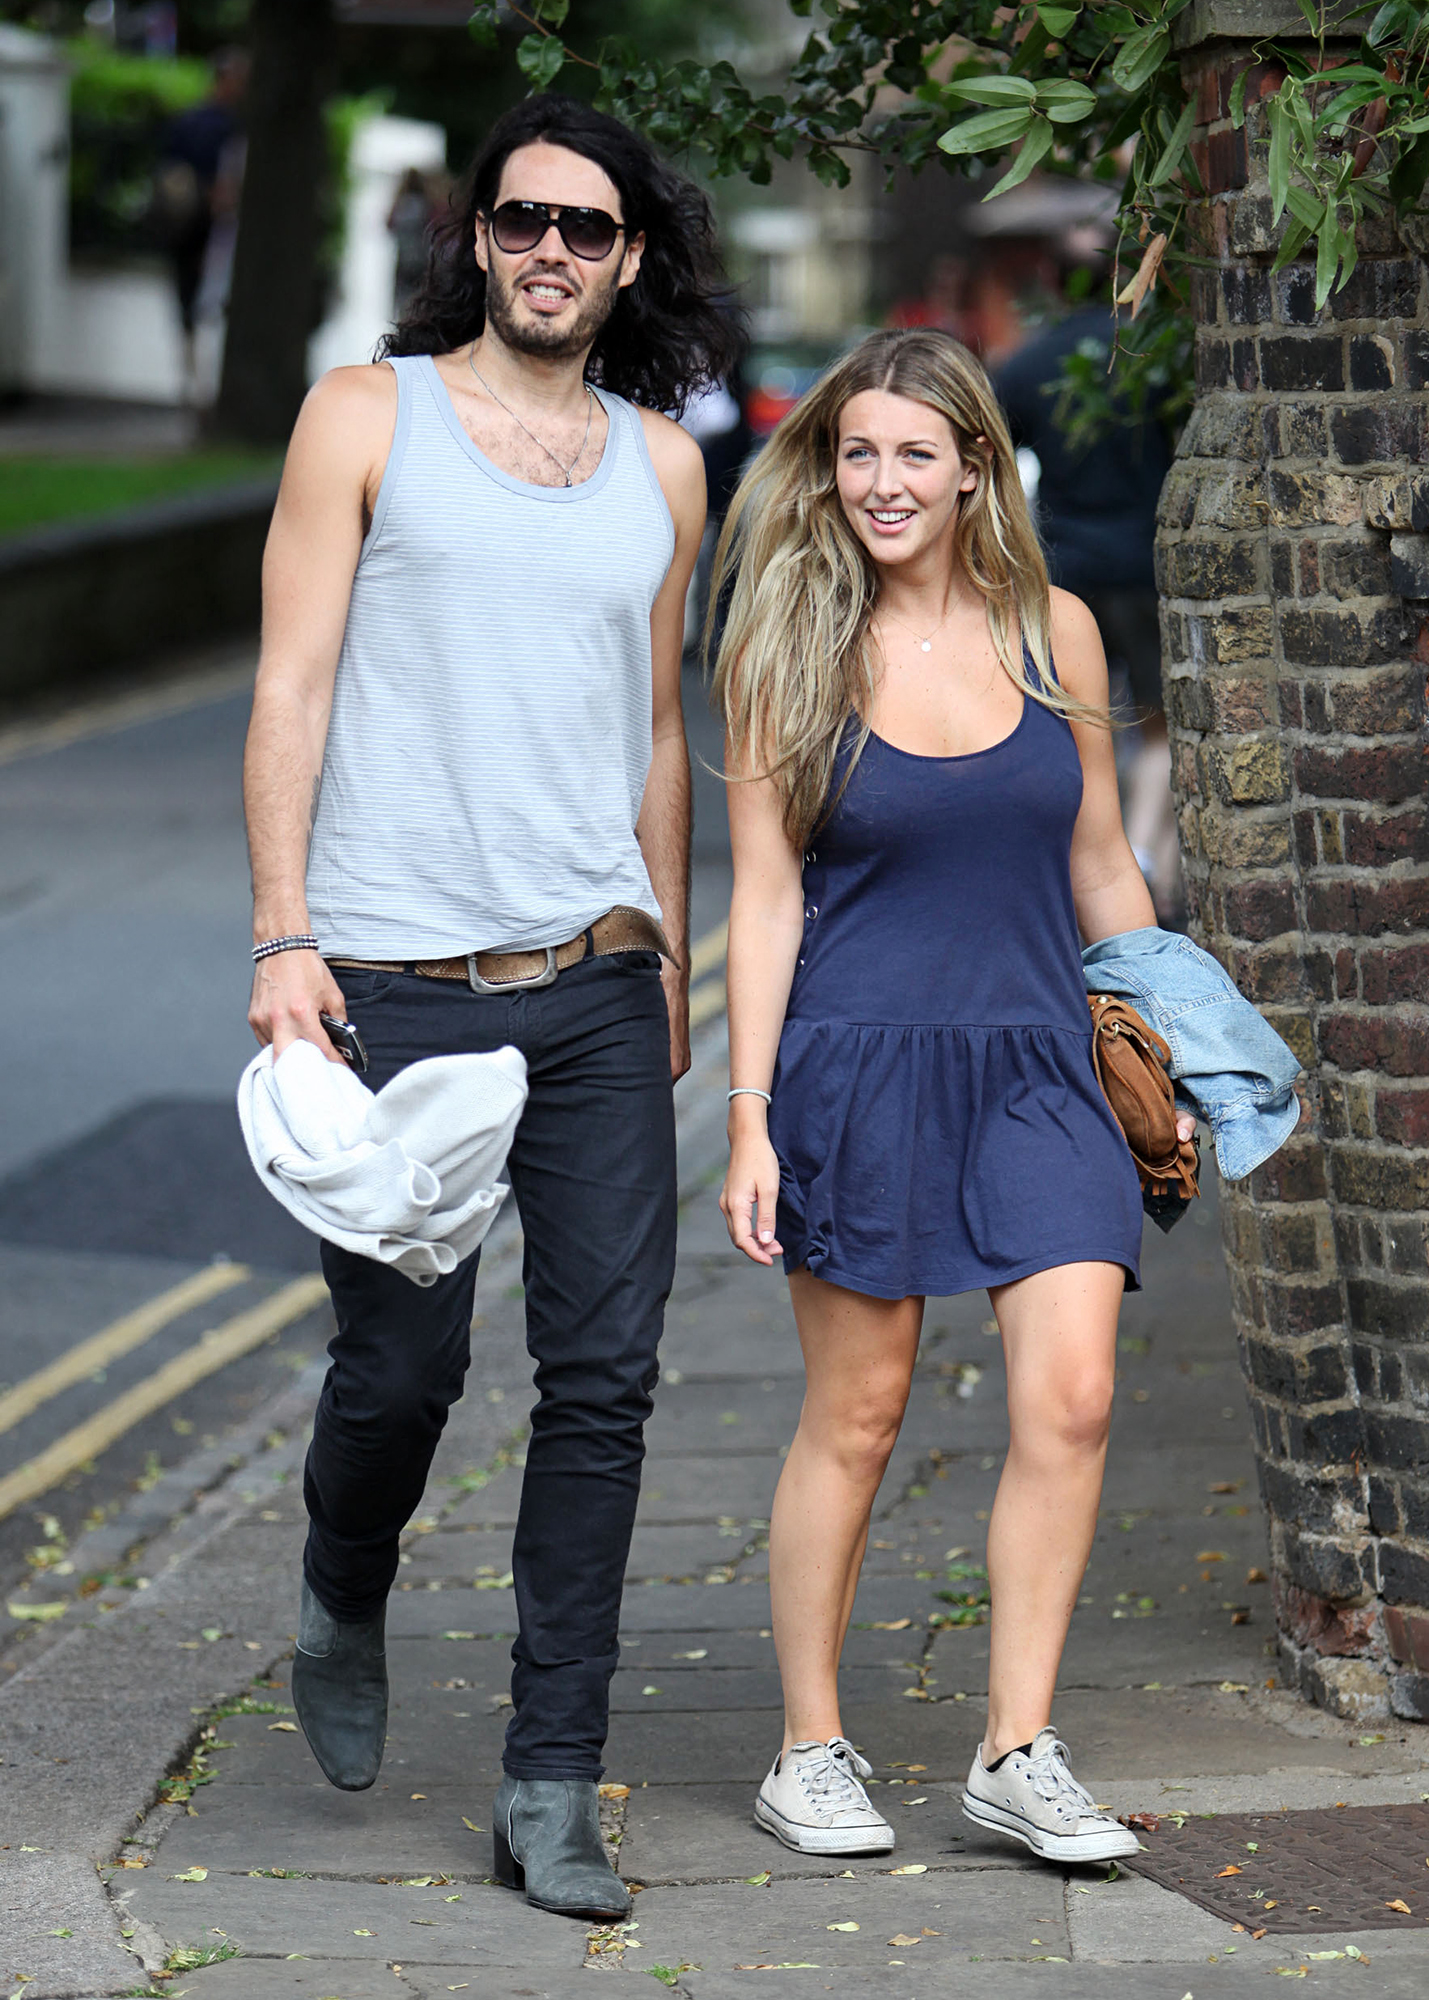 Who is Russell Brand's wife Laura Gallacher and where is she now? - Dexerto